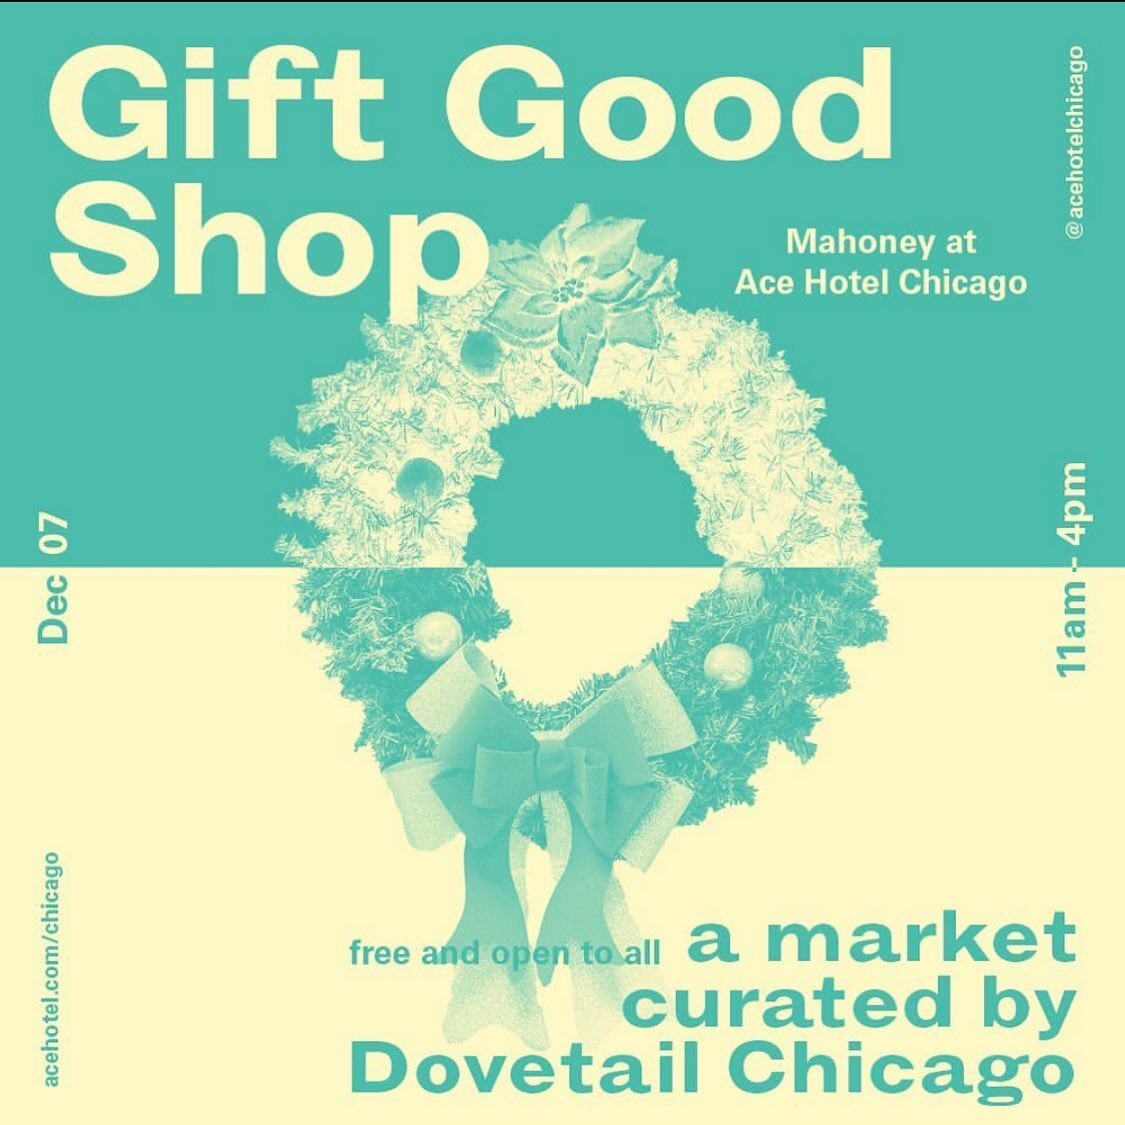 Save the date! Sat. Dec 7th #CockBloq will be at @acehotelchicago #giftgoodshop, a market curated by @dovetailchicago